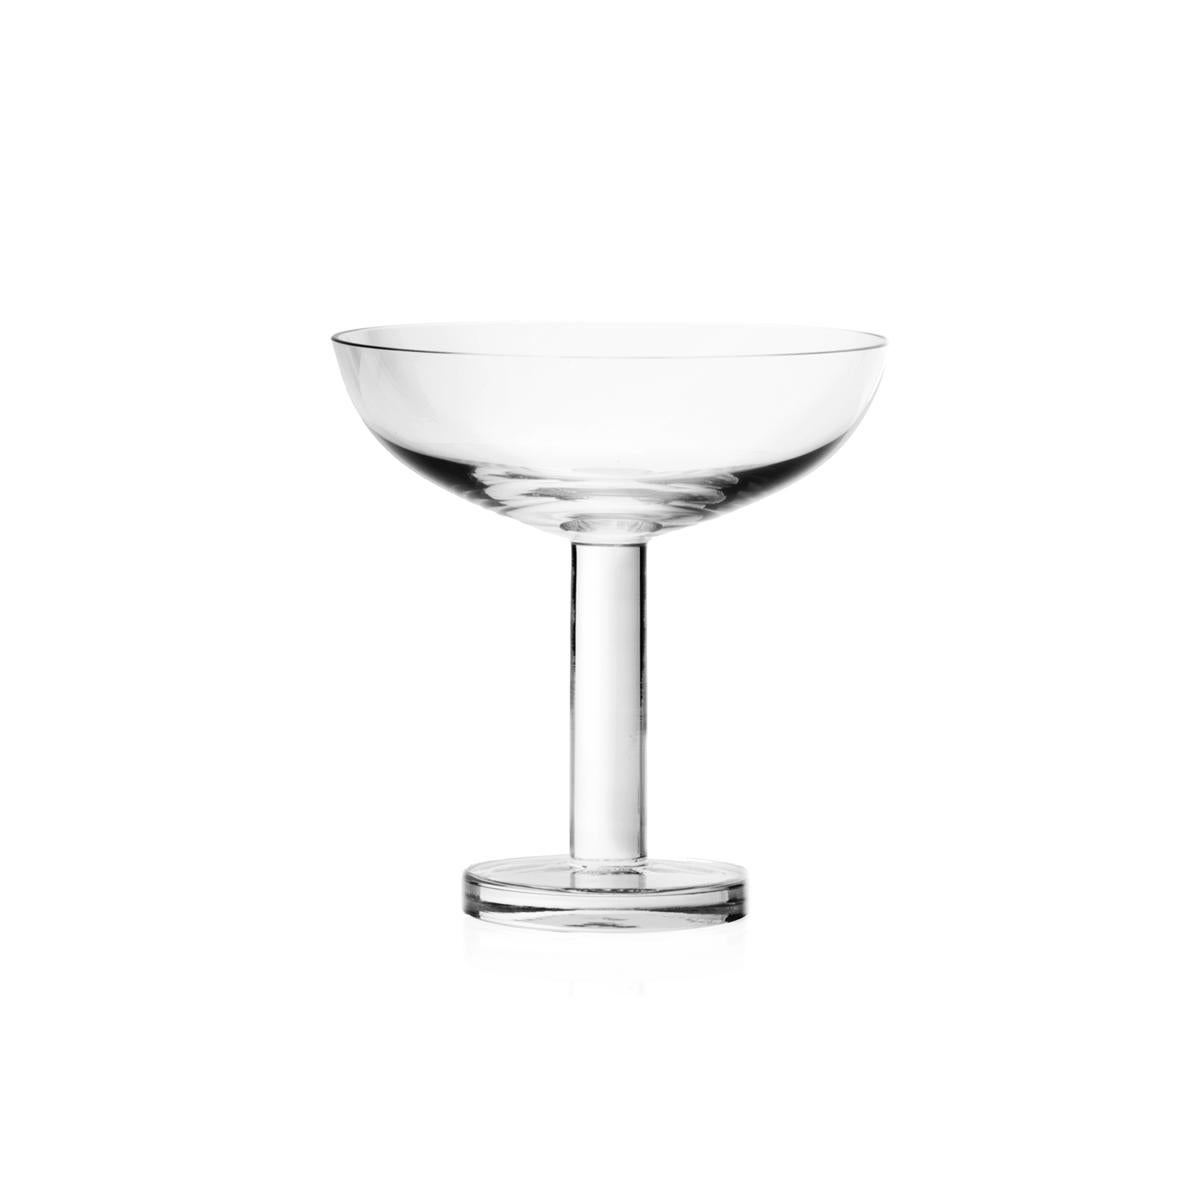 Created in 2002, the Tulip family of glasses has adapted to many people's tables and homes. It has become one of the best-selling pieces in the Paola C. collection and a favorite among its customers. Despite numerous imitations and similarities to